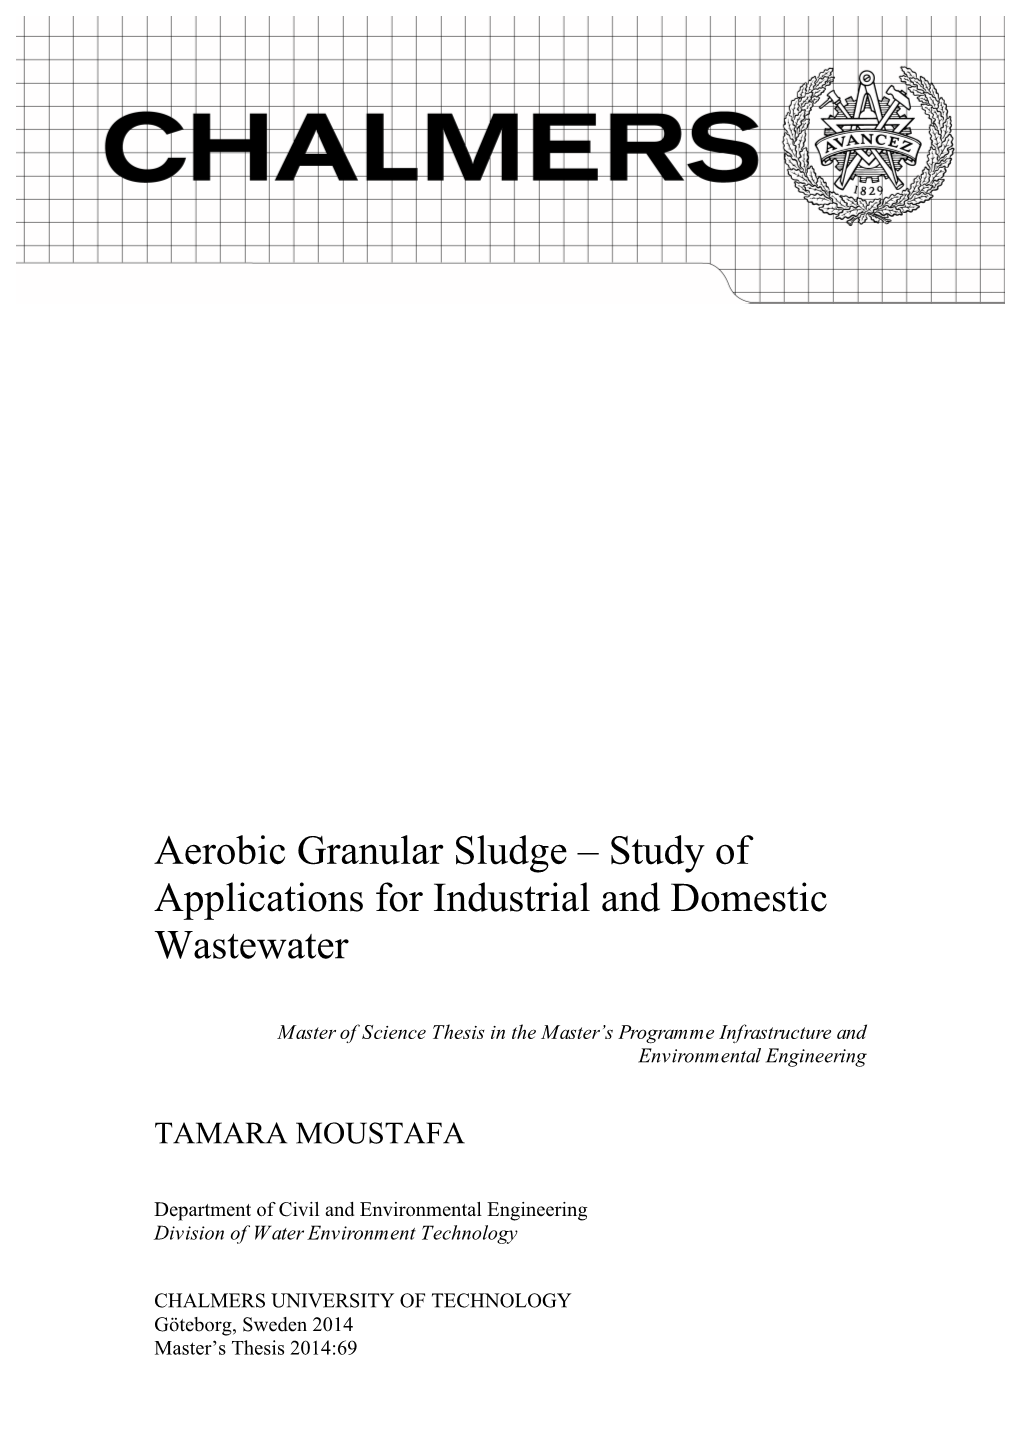 Aerobic Granular Sludge – Study of Applications for Industrial and Domestic Wastewater